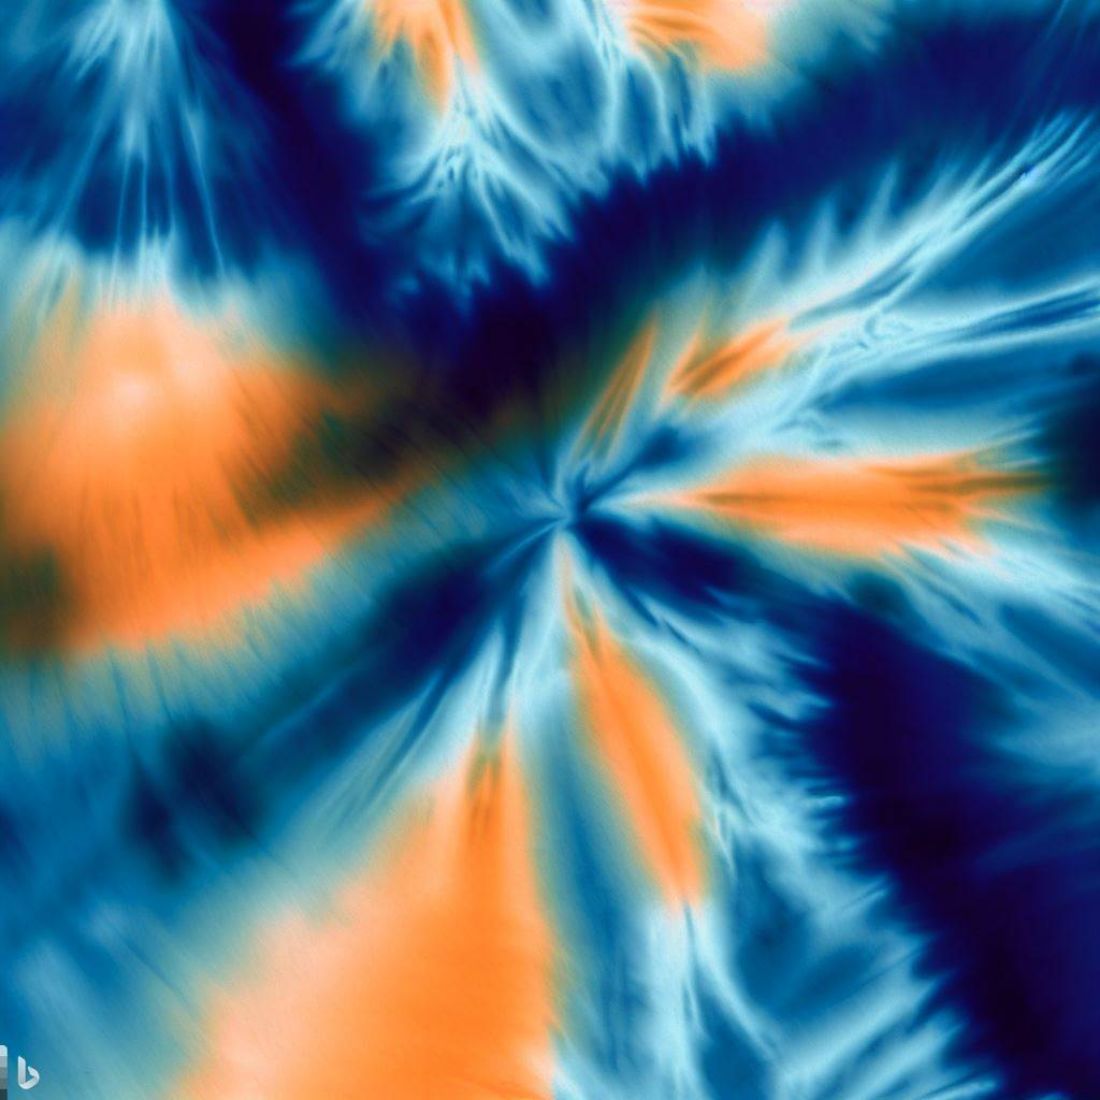 4 Tie dye psychedelic background images in the colour combination orange-blue preview image.